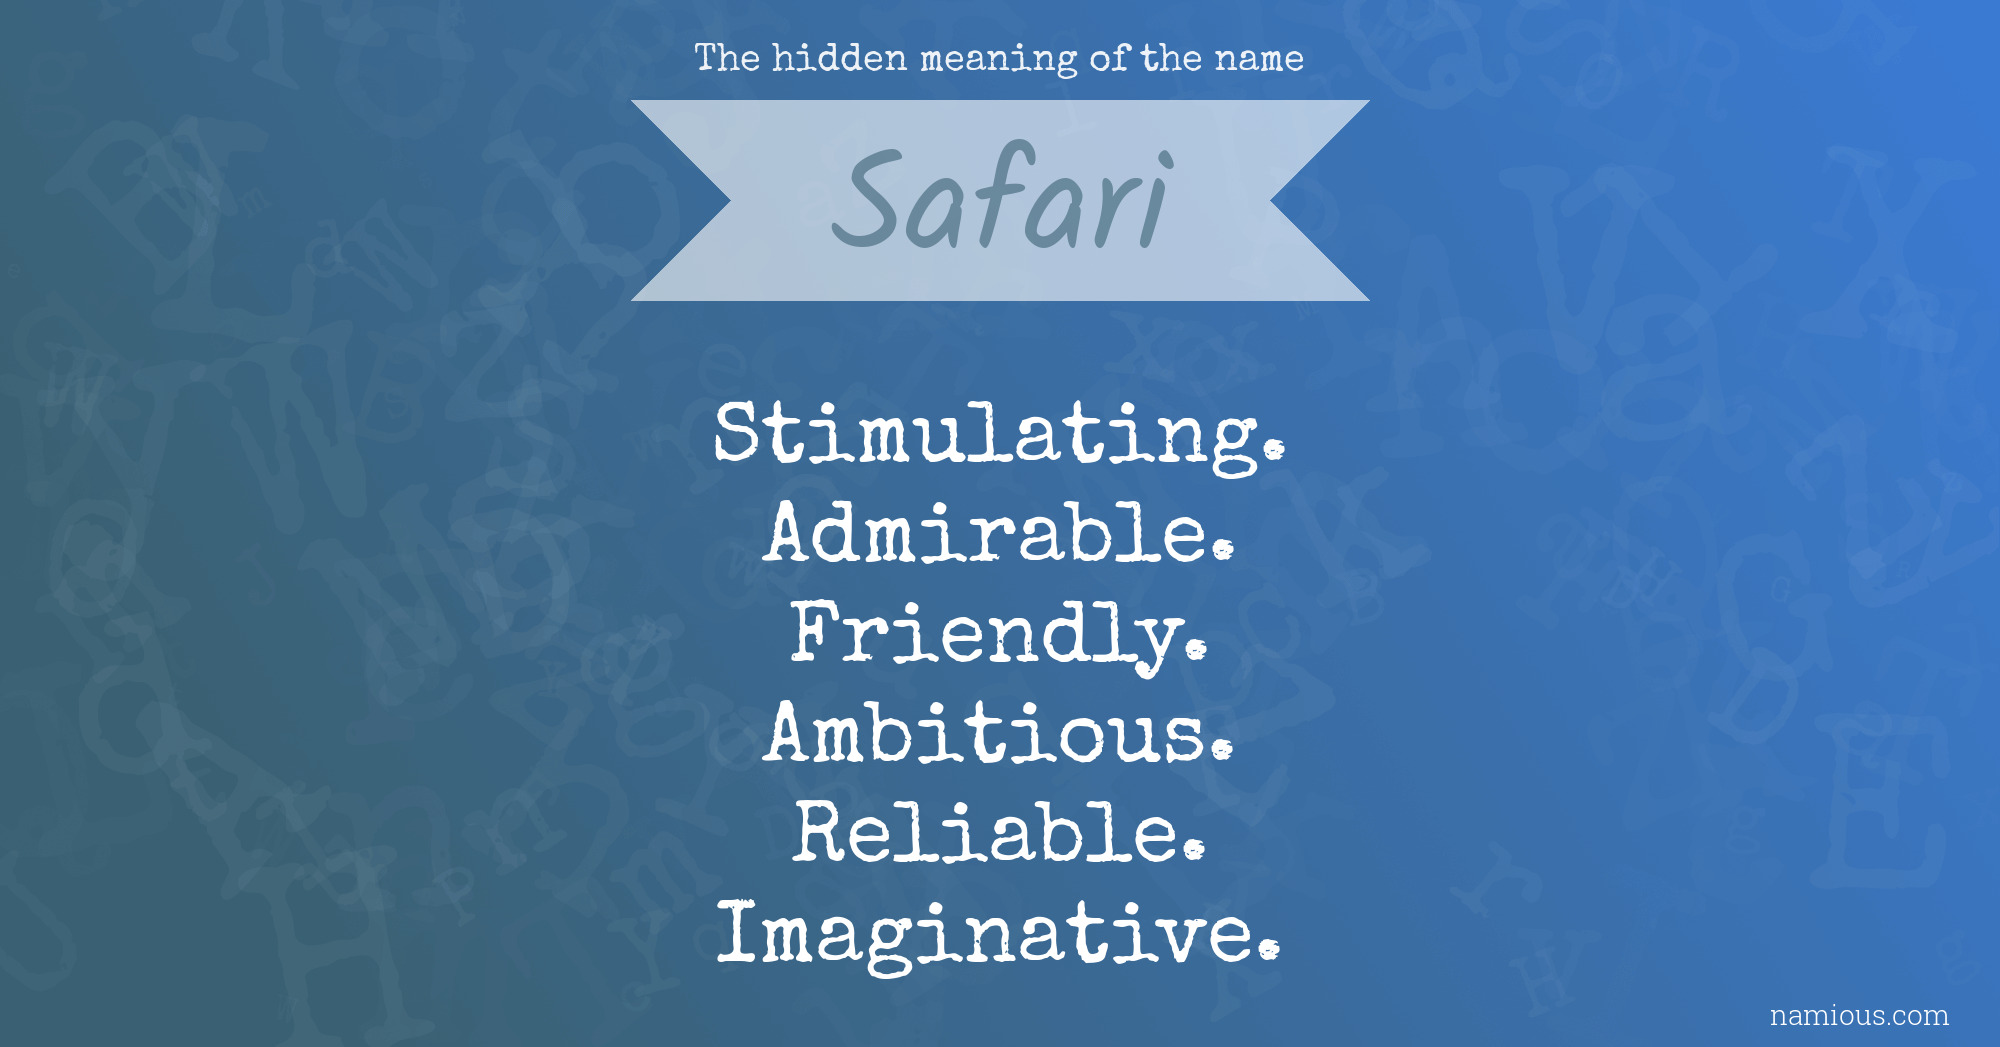 The hidden meaning of the name Safari